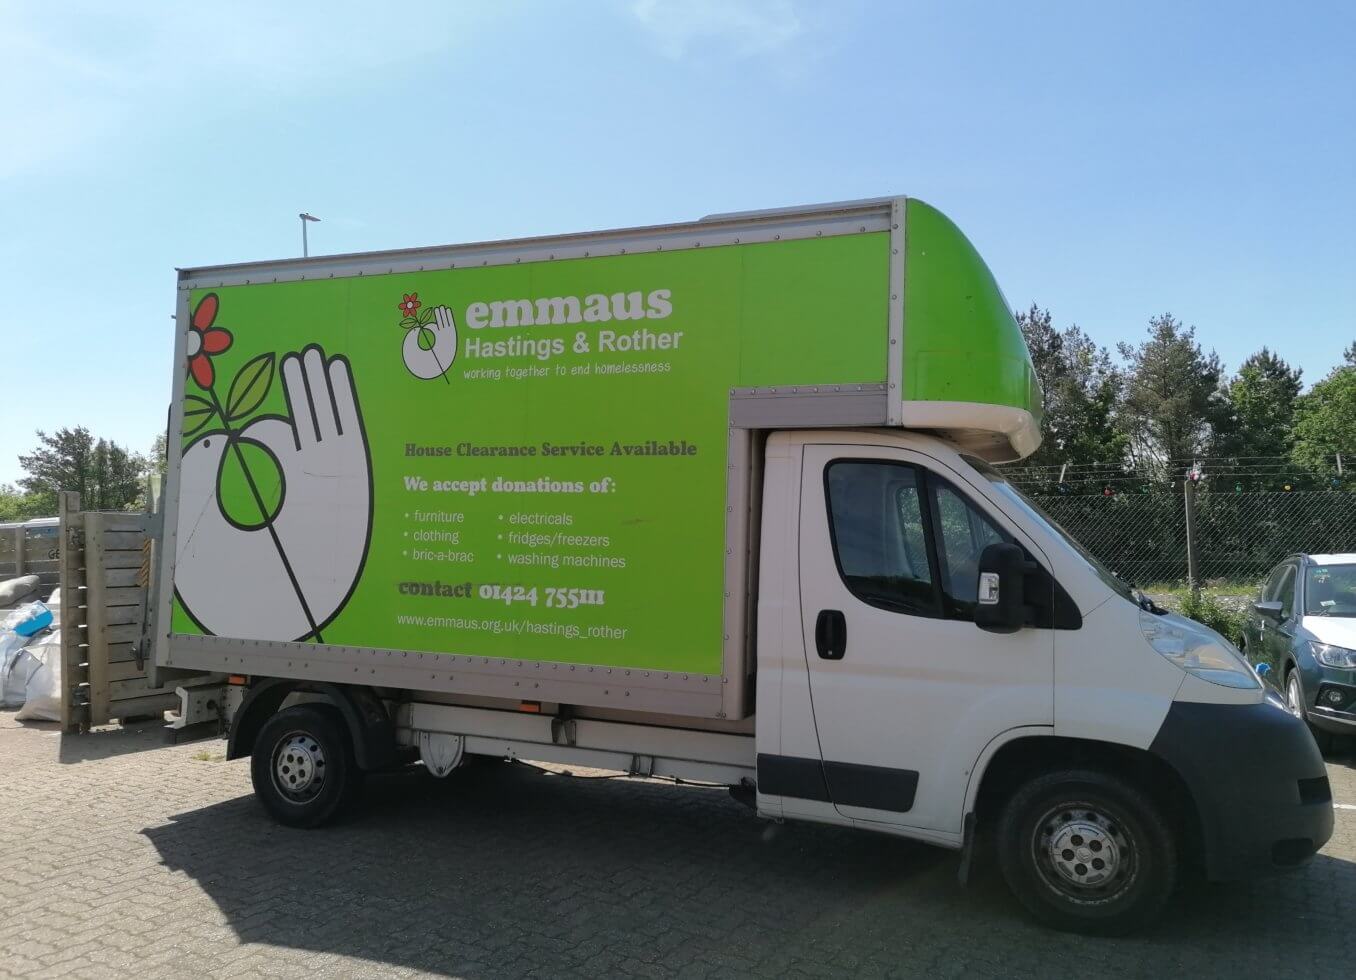 Donating goods to Emmaus Hastings and Rother